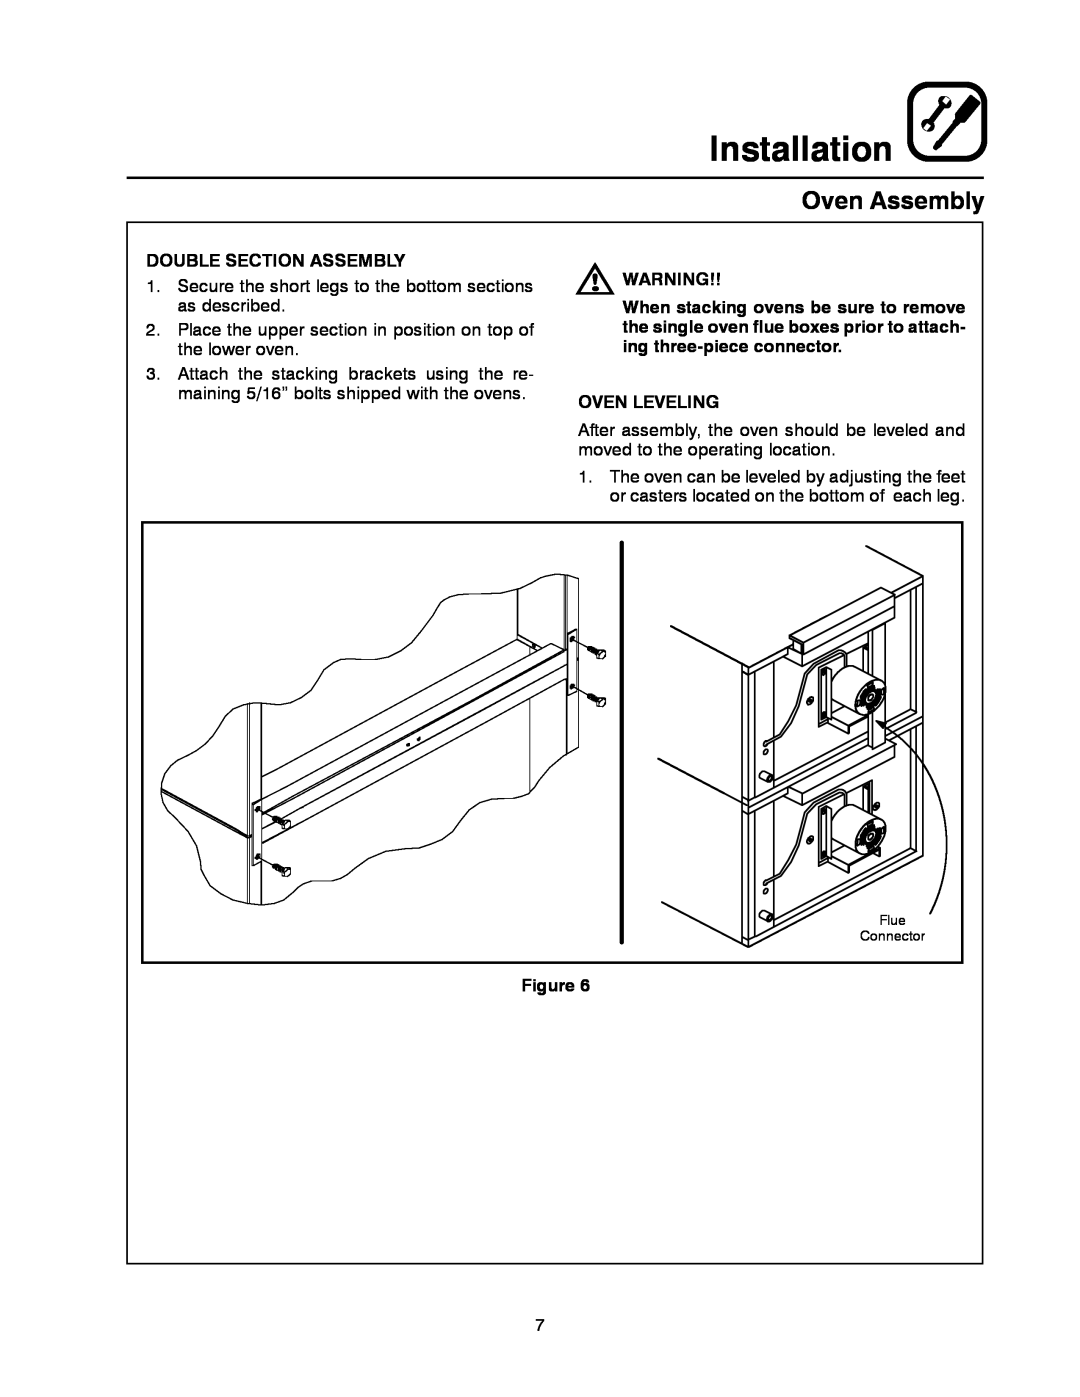 Blodgett SHO-E manual Installation, Double Section Assembly, Oven Leveling 